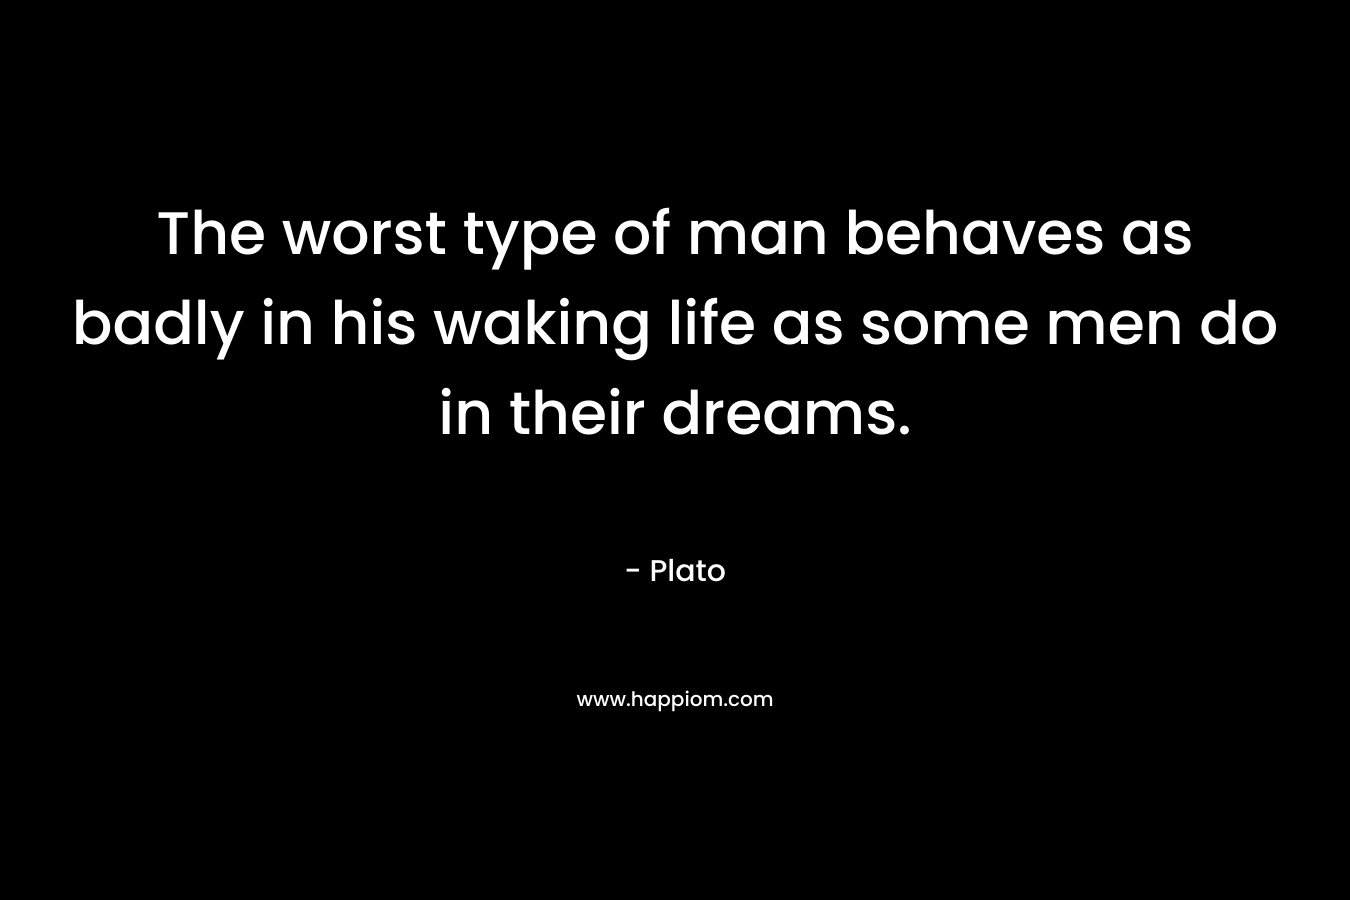 The worst type of man behaves as badly in his waking life as some men do in their dreams.